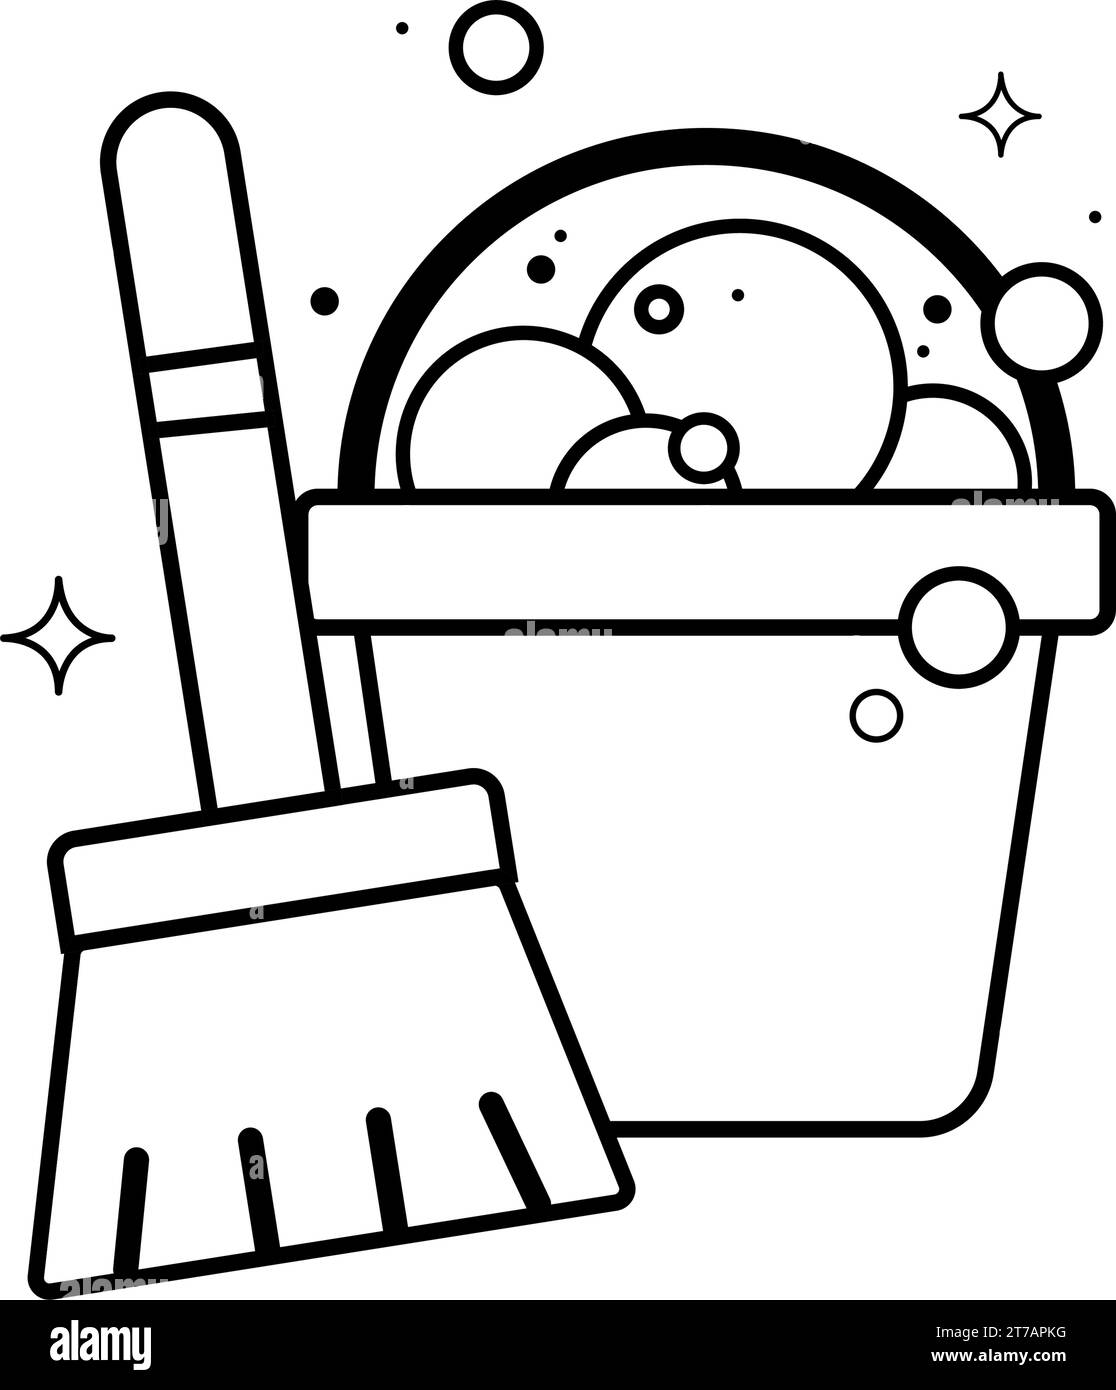 Isolated wooden broom and bucket with bubbles icon Vector Stock Vector